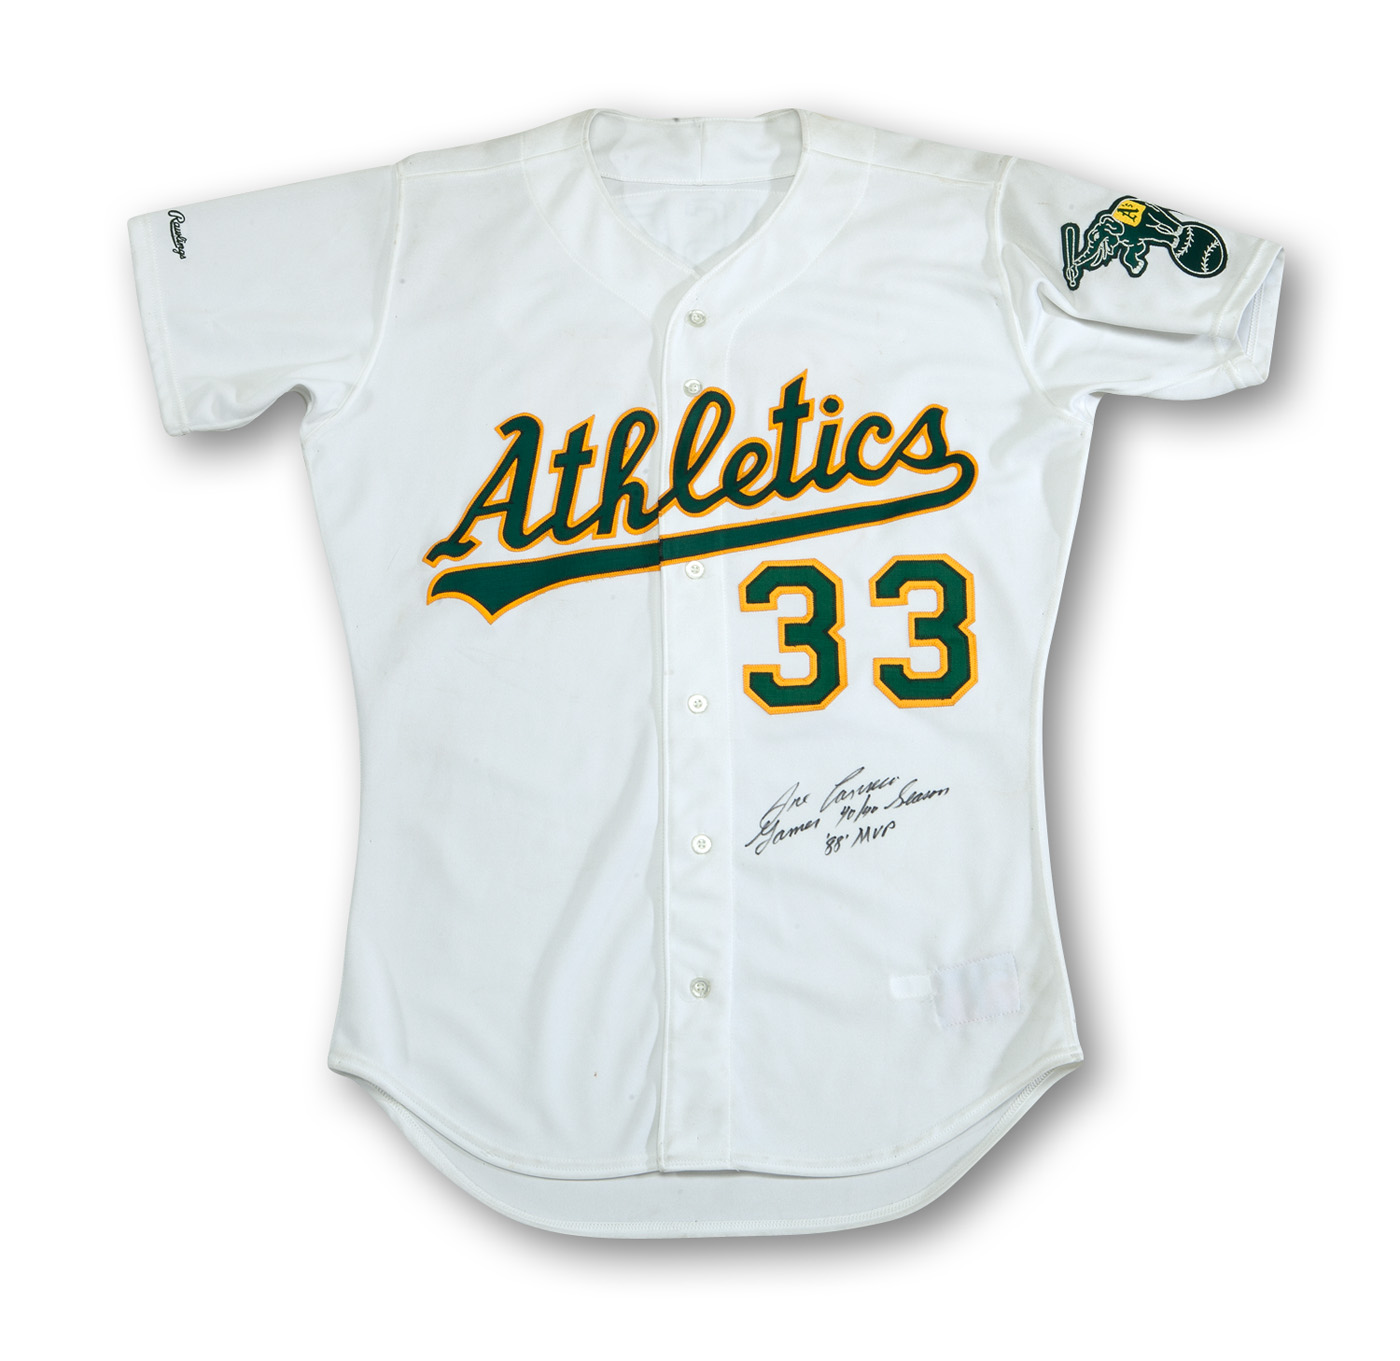 Oakland A's Athletics Blank Game Issued White Jersey 46 DP48223